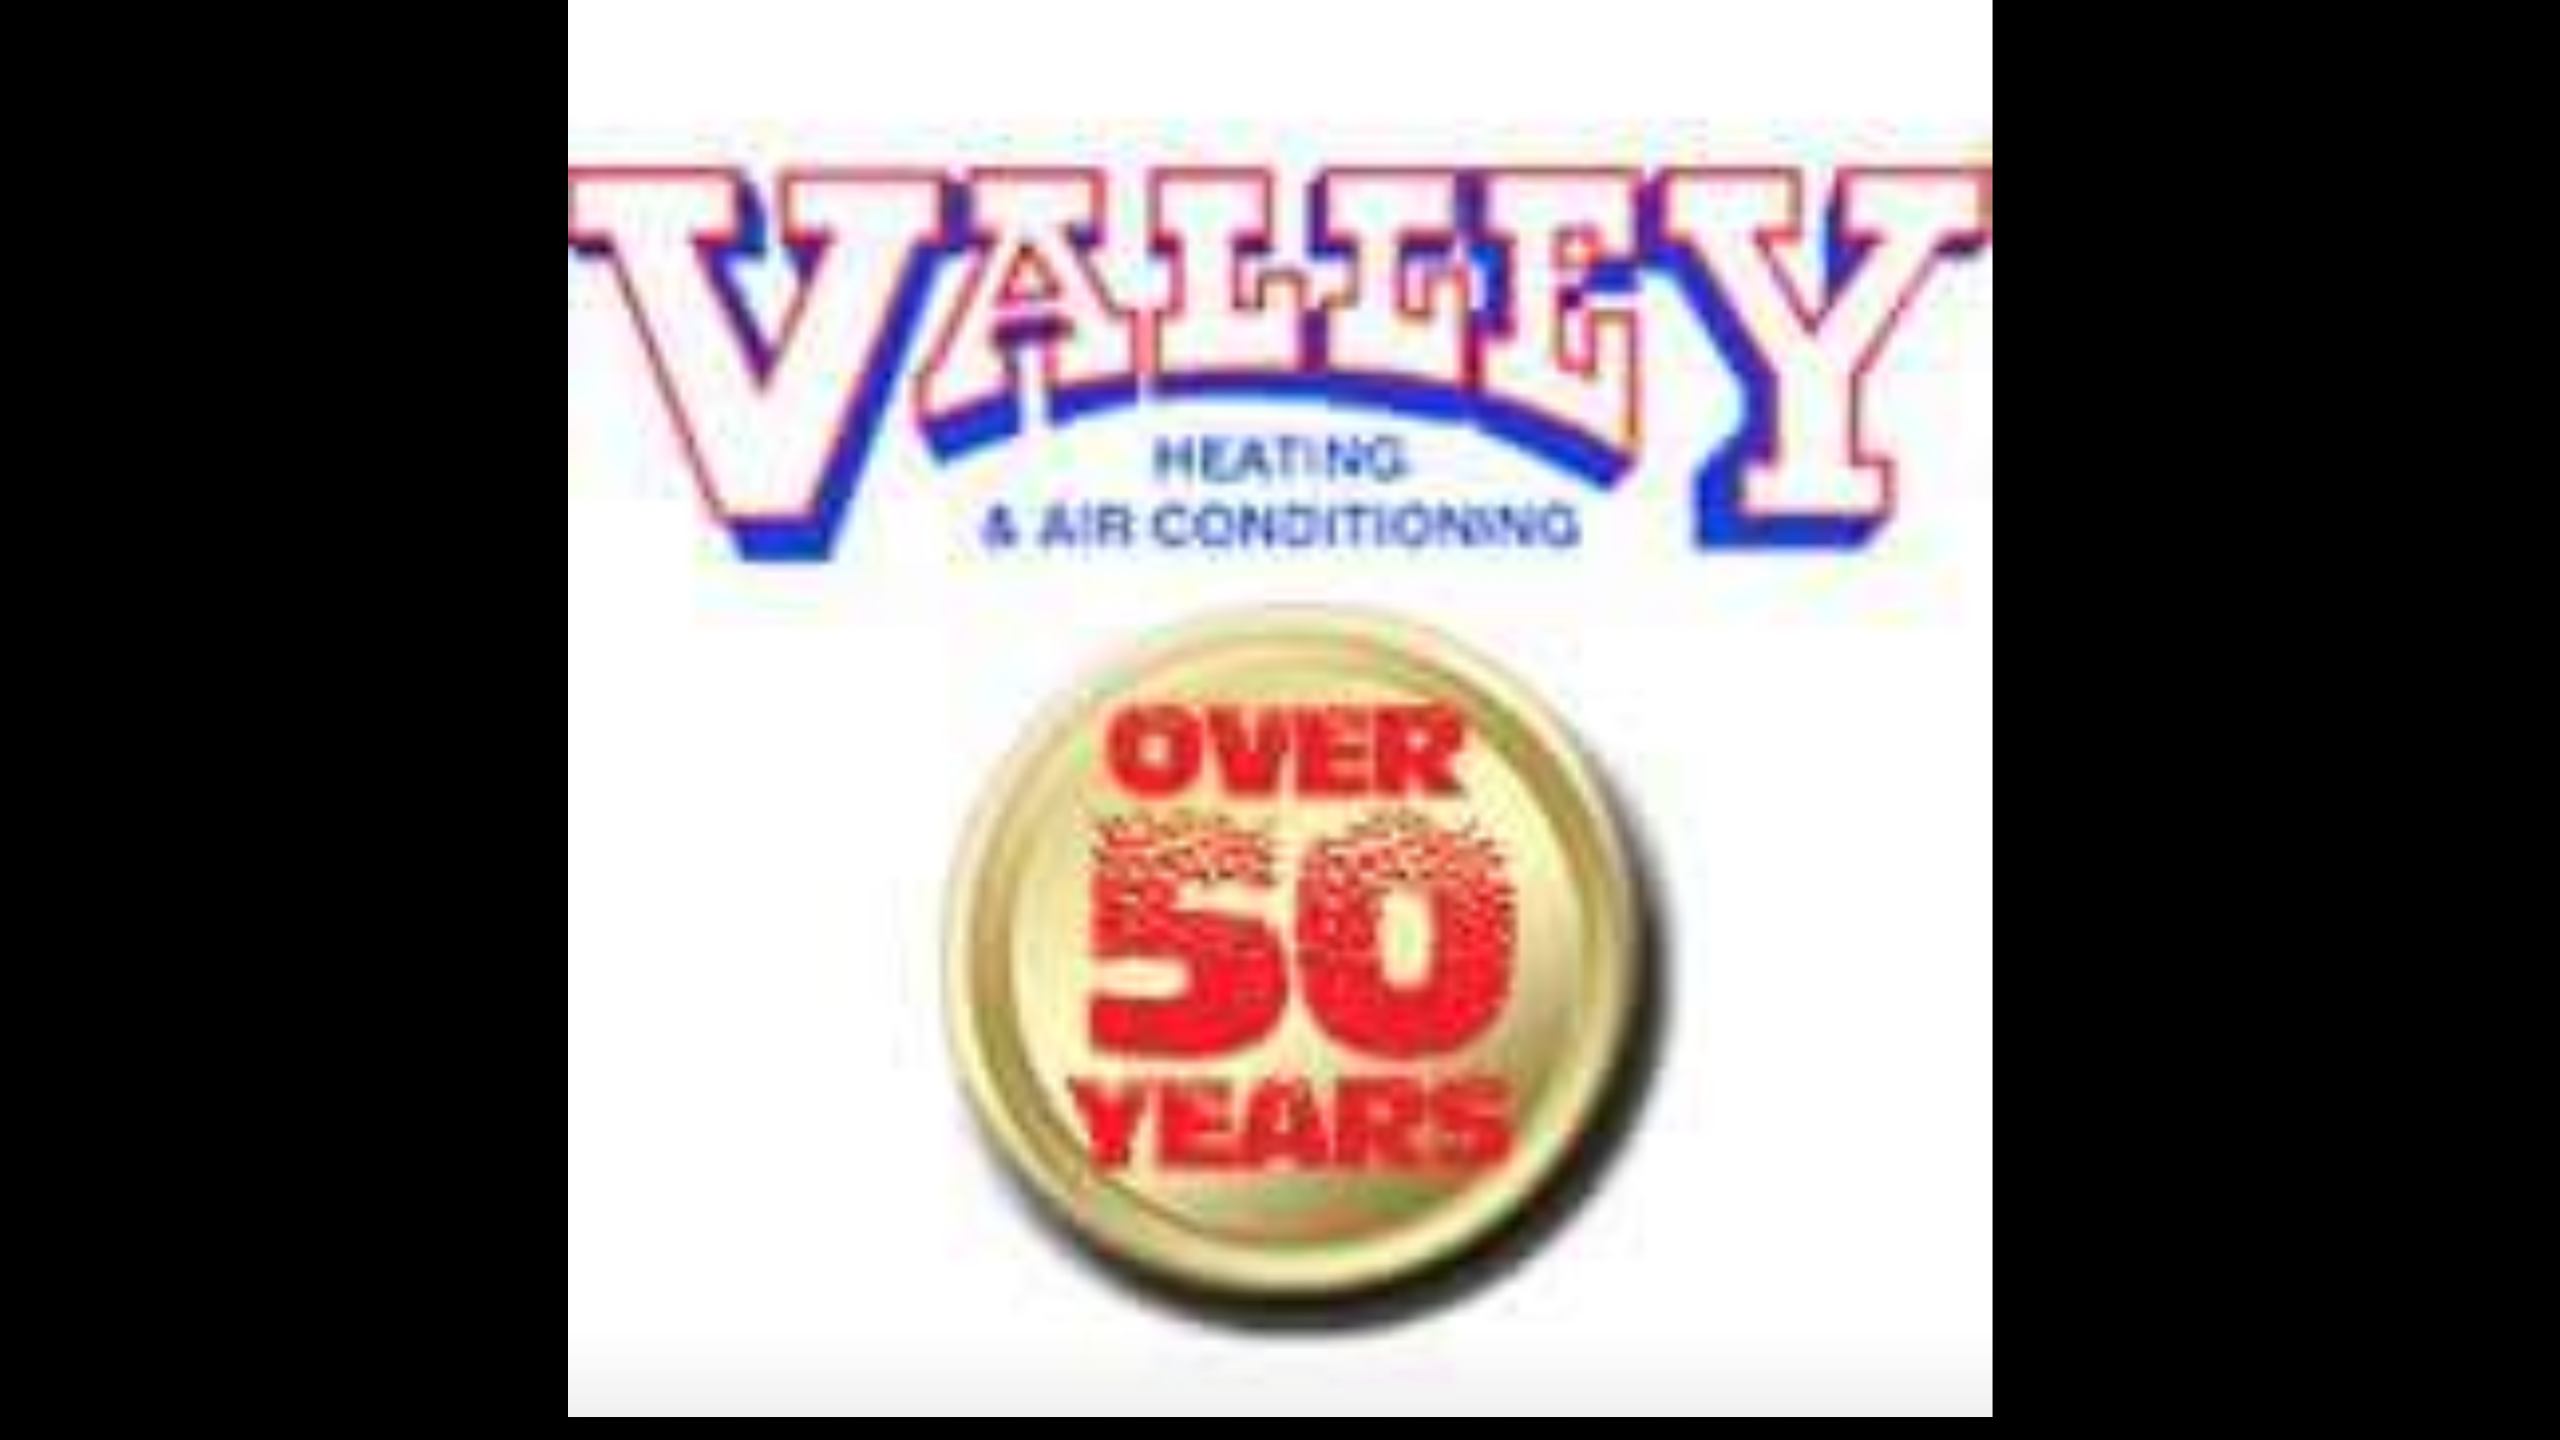 Valley Heating & Air Conditioning & Home Improvements, Inc. Logo